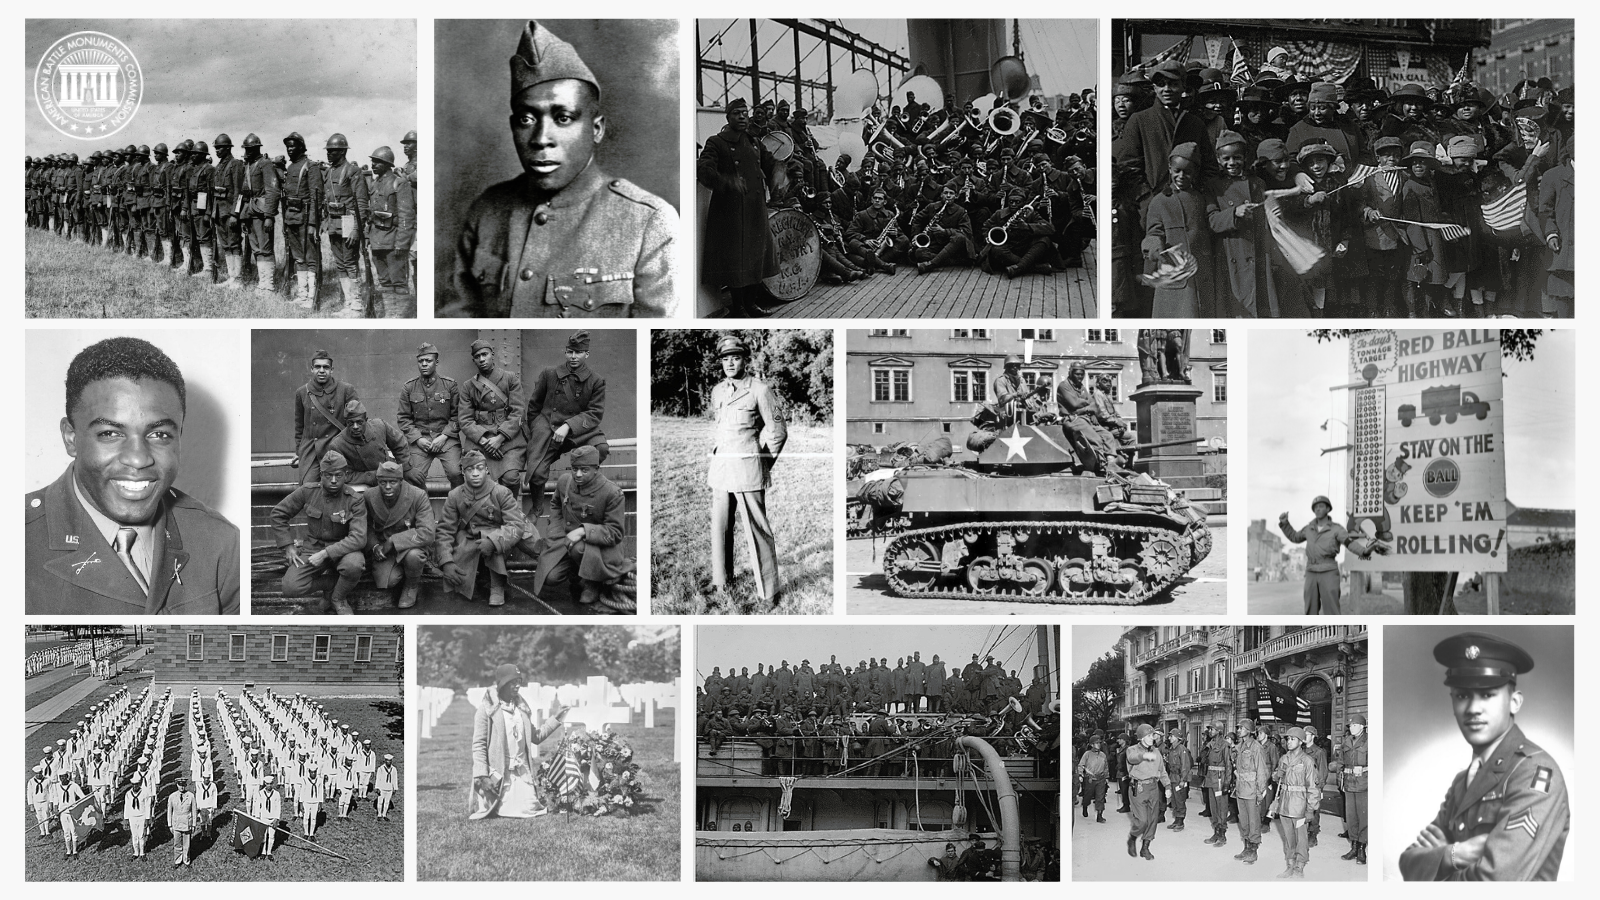 African-American and white soldiers during World War II